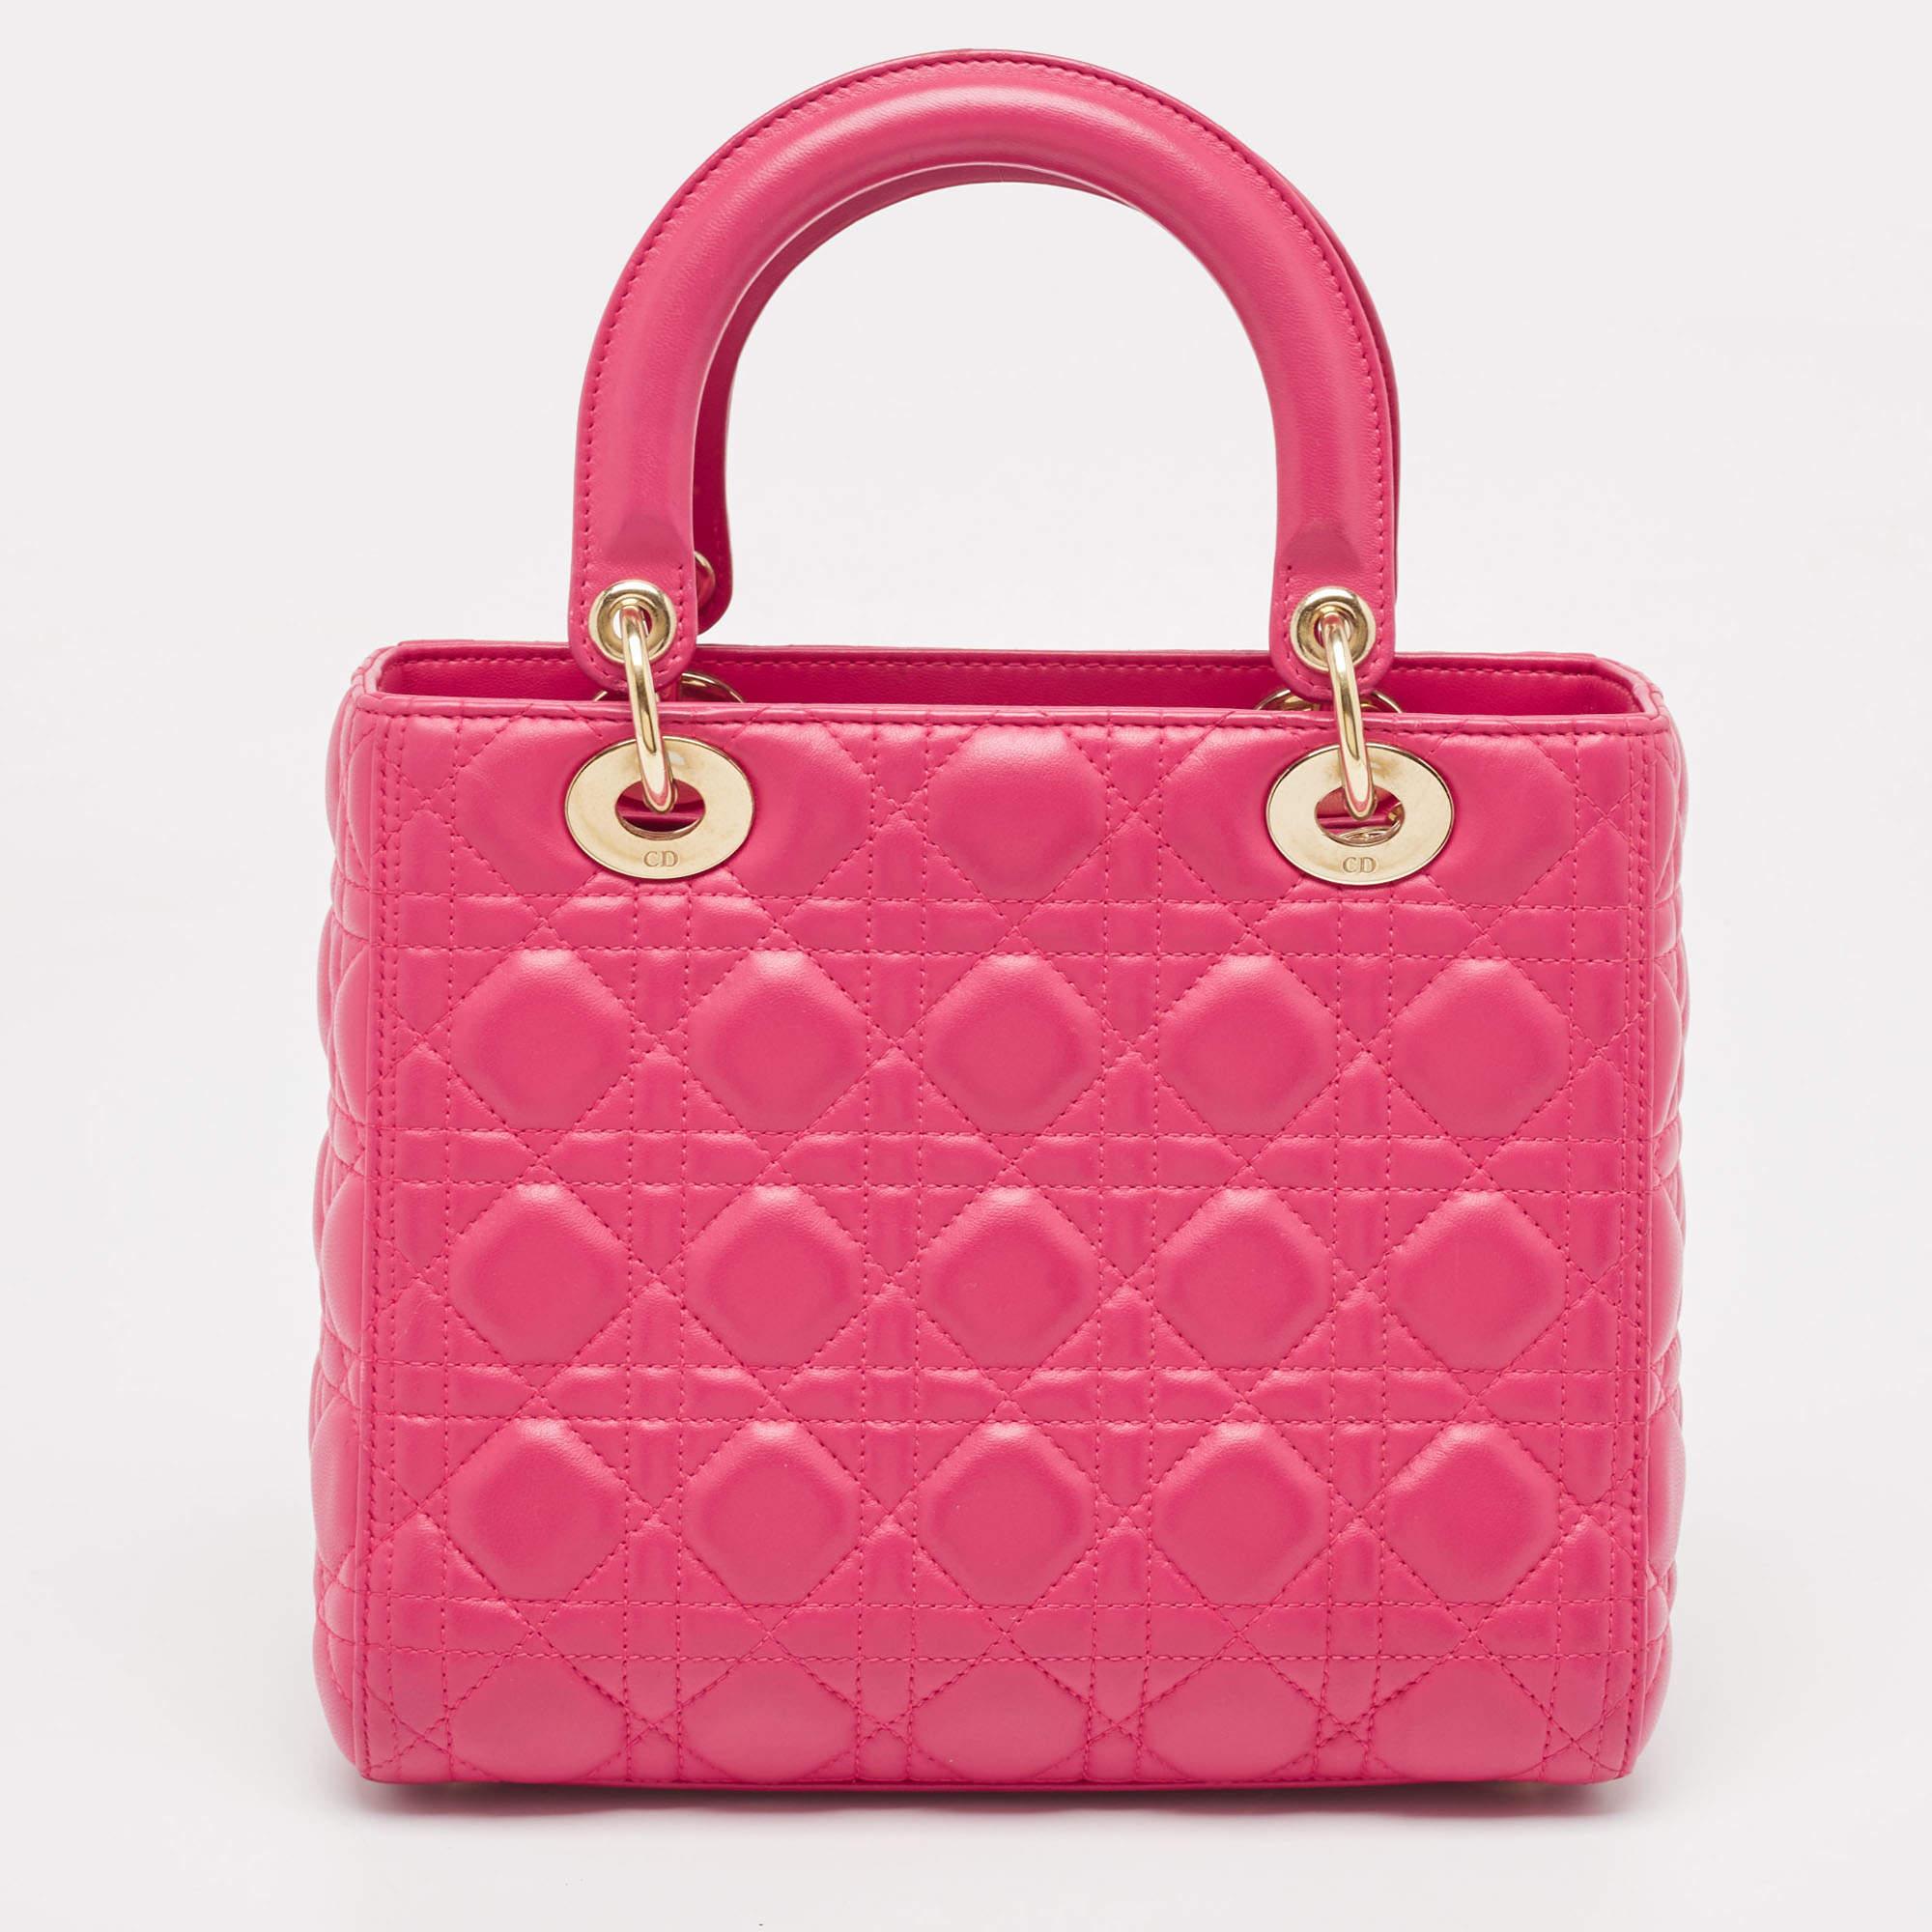 Ensure your day's essentials are in order and your outfit is complete with this pink Lady Dior bag. Crafted using the best materials, the bag carries the maison's signature of artful craftsmanship and enduring appeal.

Includes: Original Dustbag,